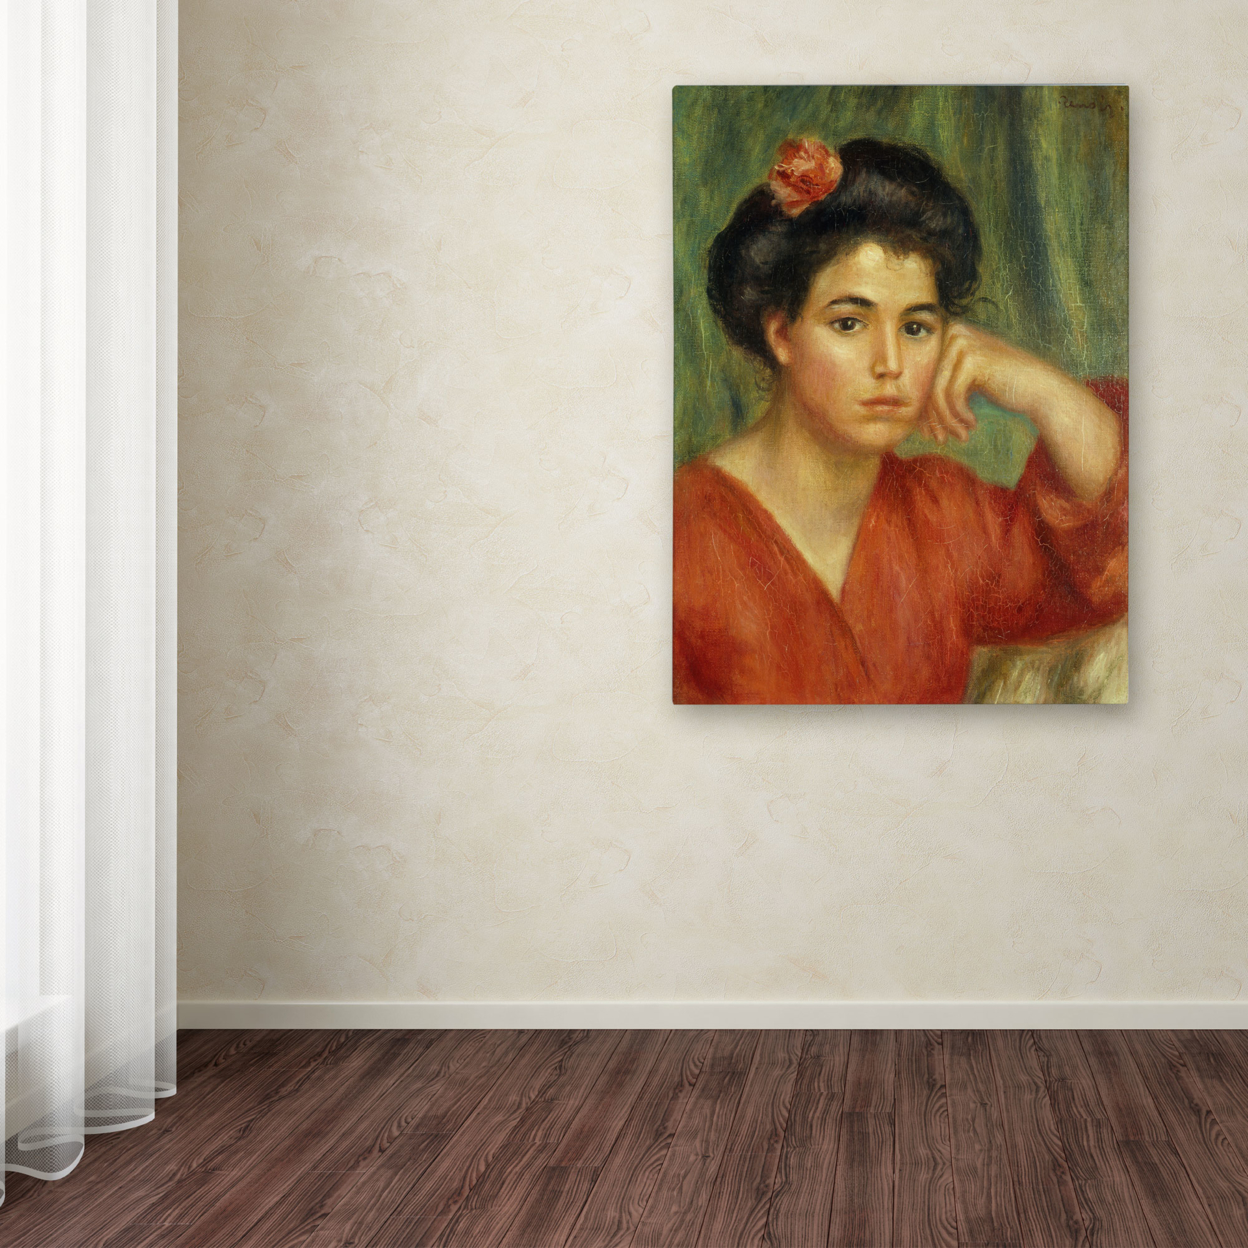 Pierre Renoir 'Young Woman With A Rose 1907' Canvas Wall Art 35 X 47 Inches